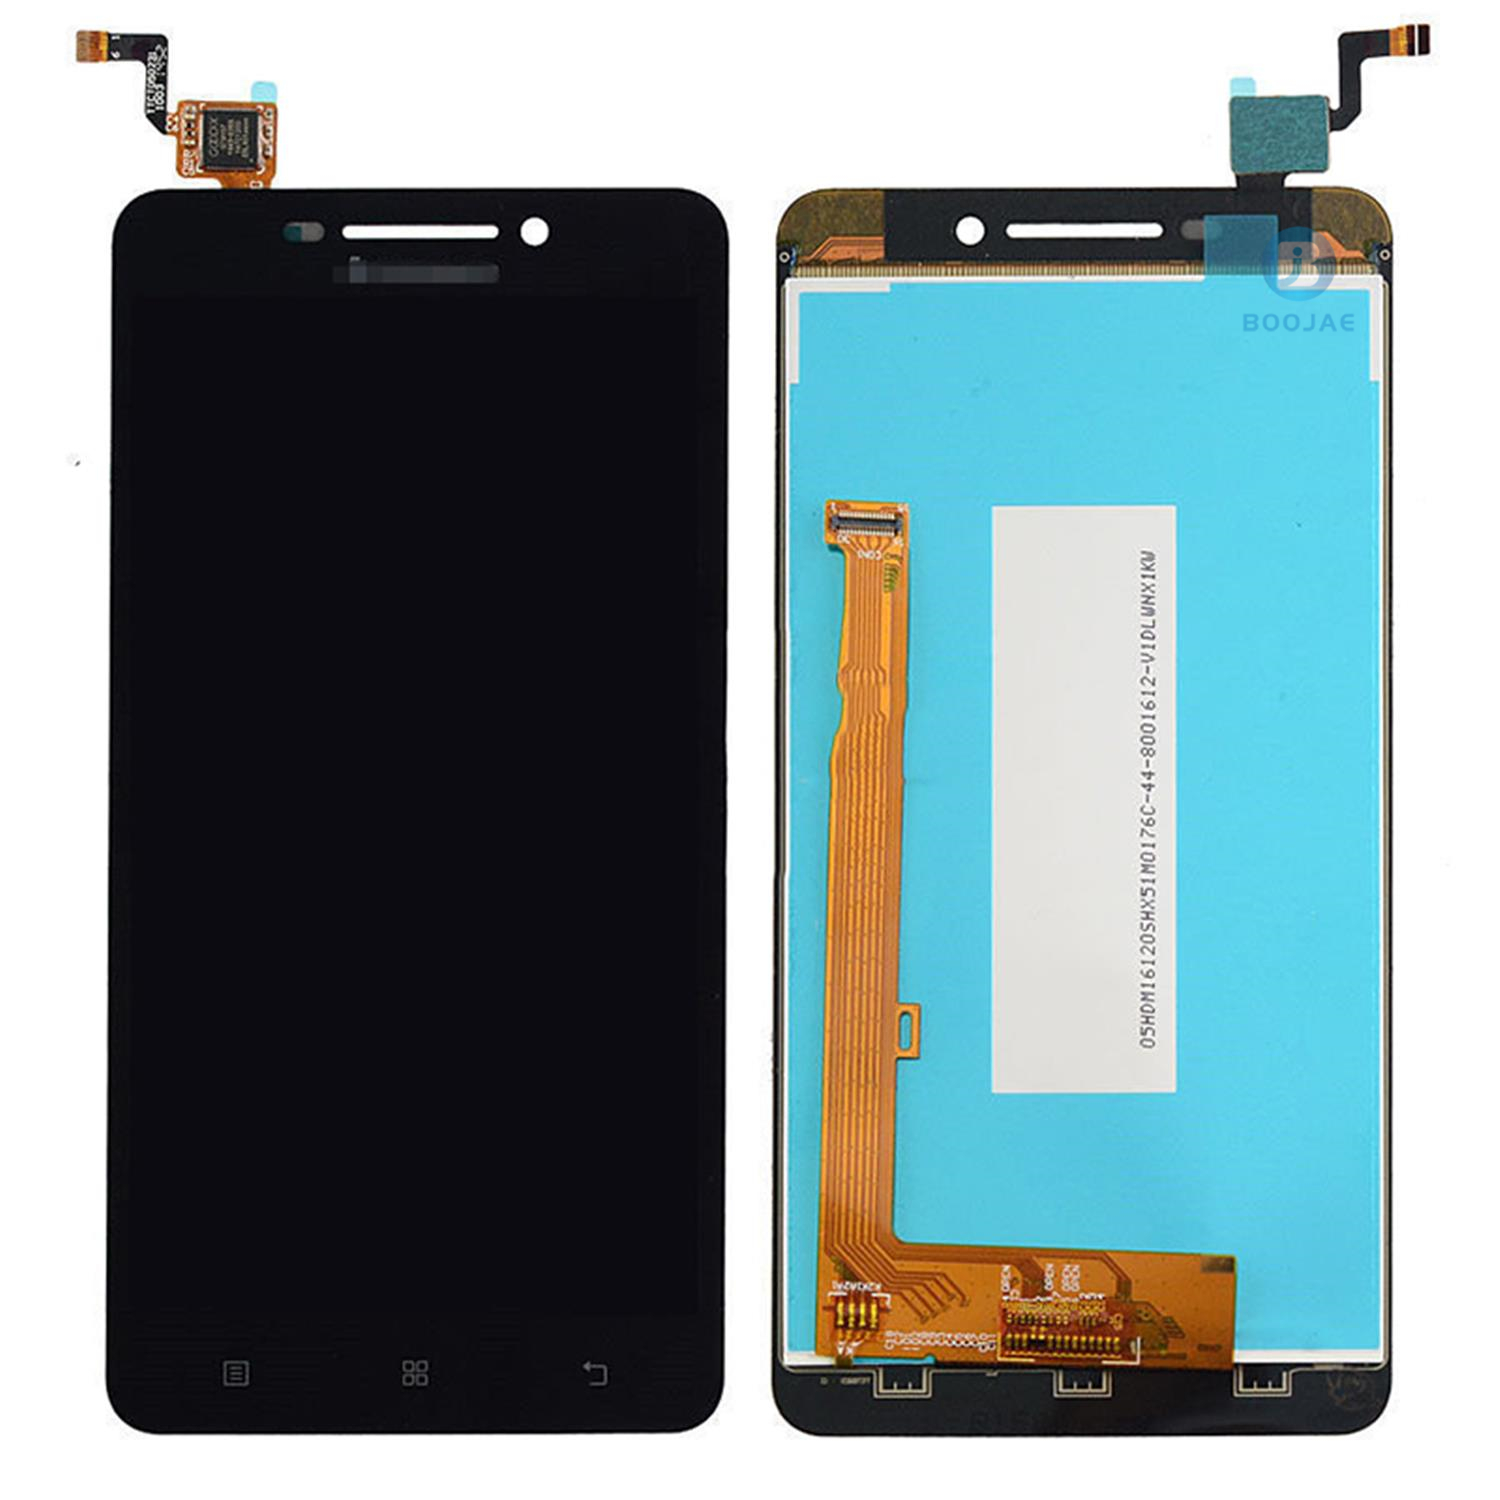 Lenovo A5000 LCD Screen Display, Lcd Assembly Replacement